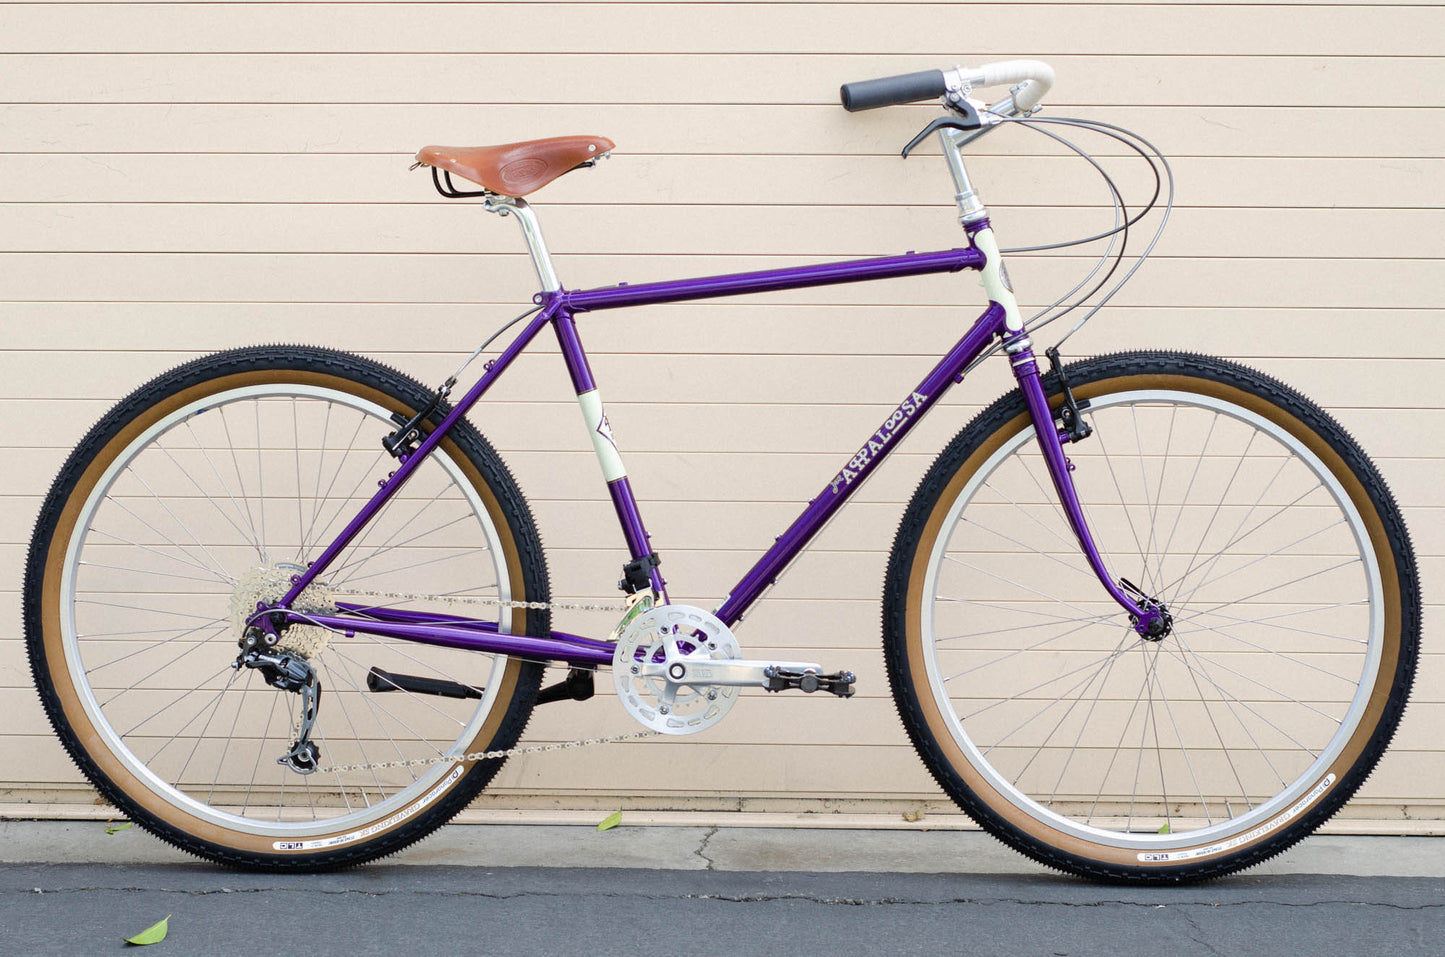 Appaloosa Build - Antonio's Pick (frame not included)